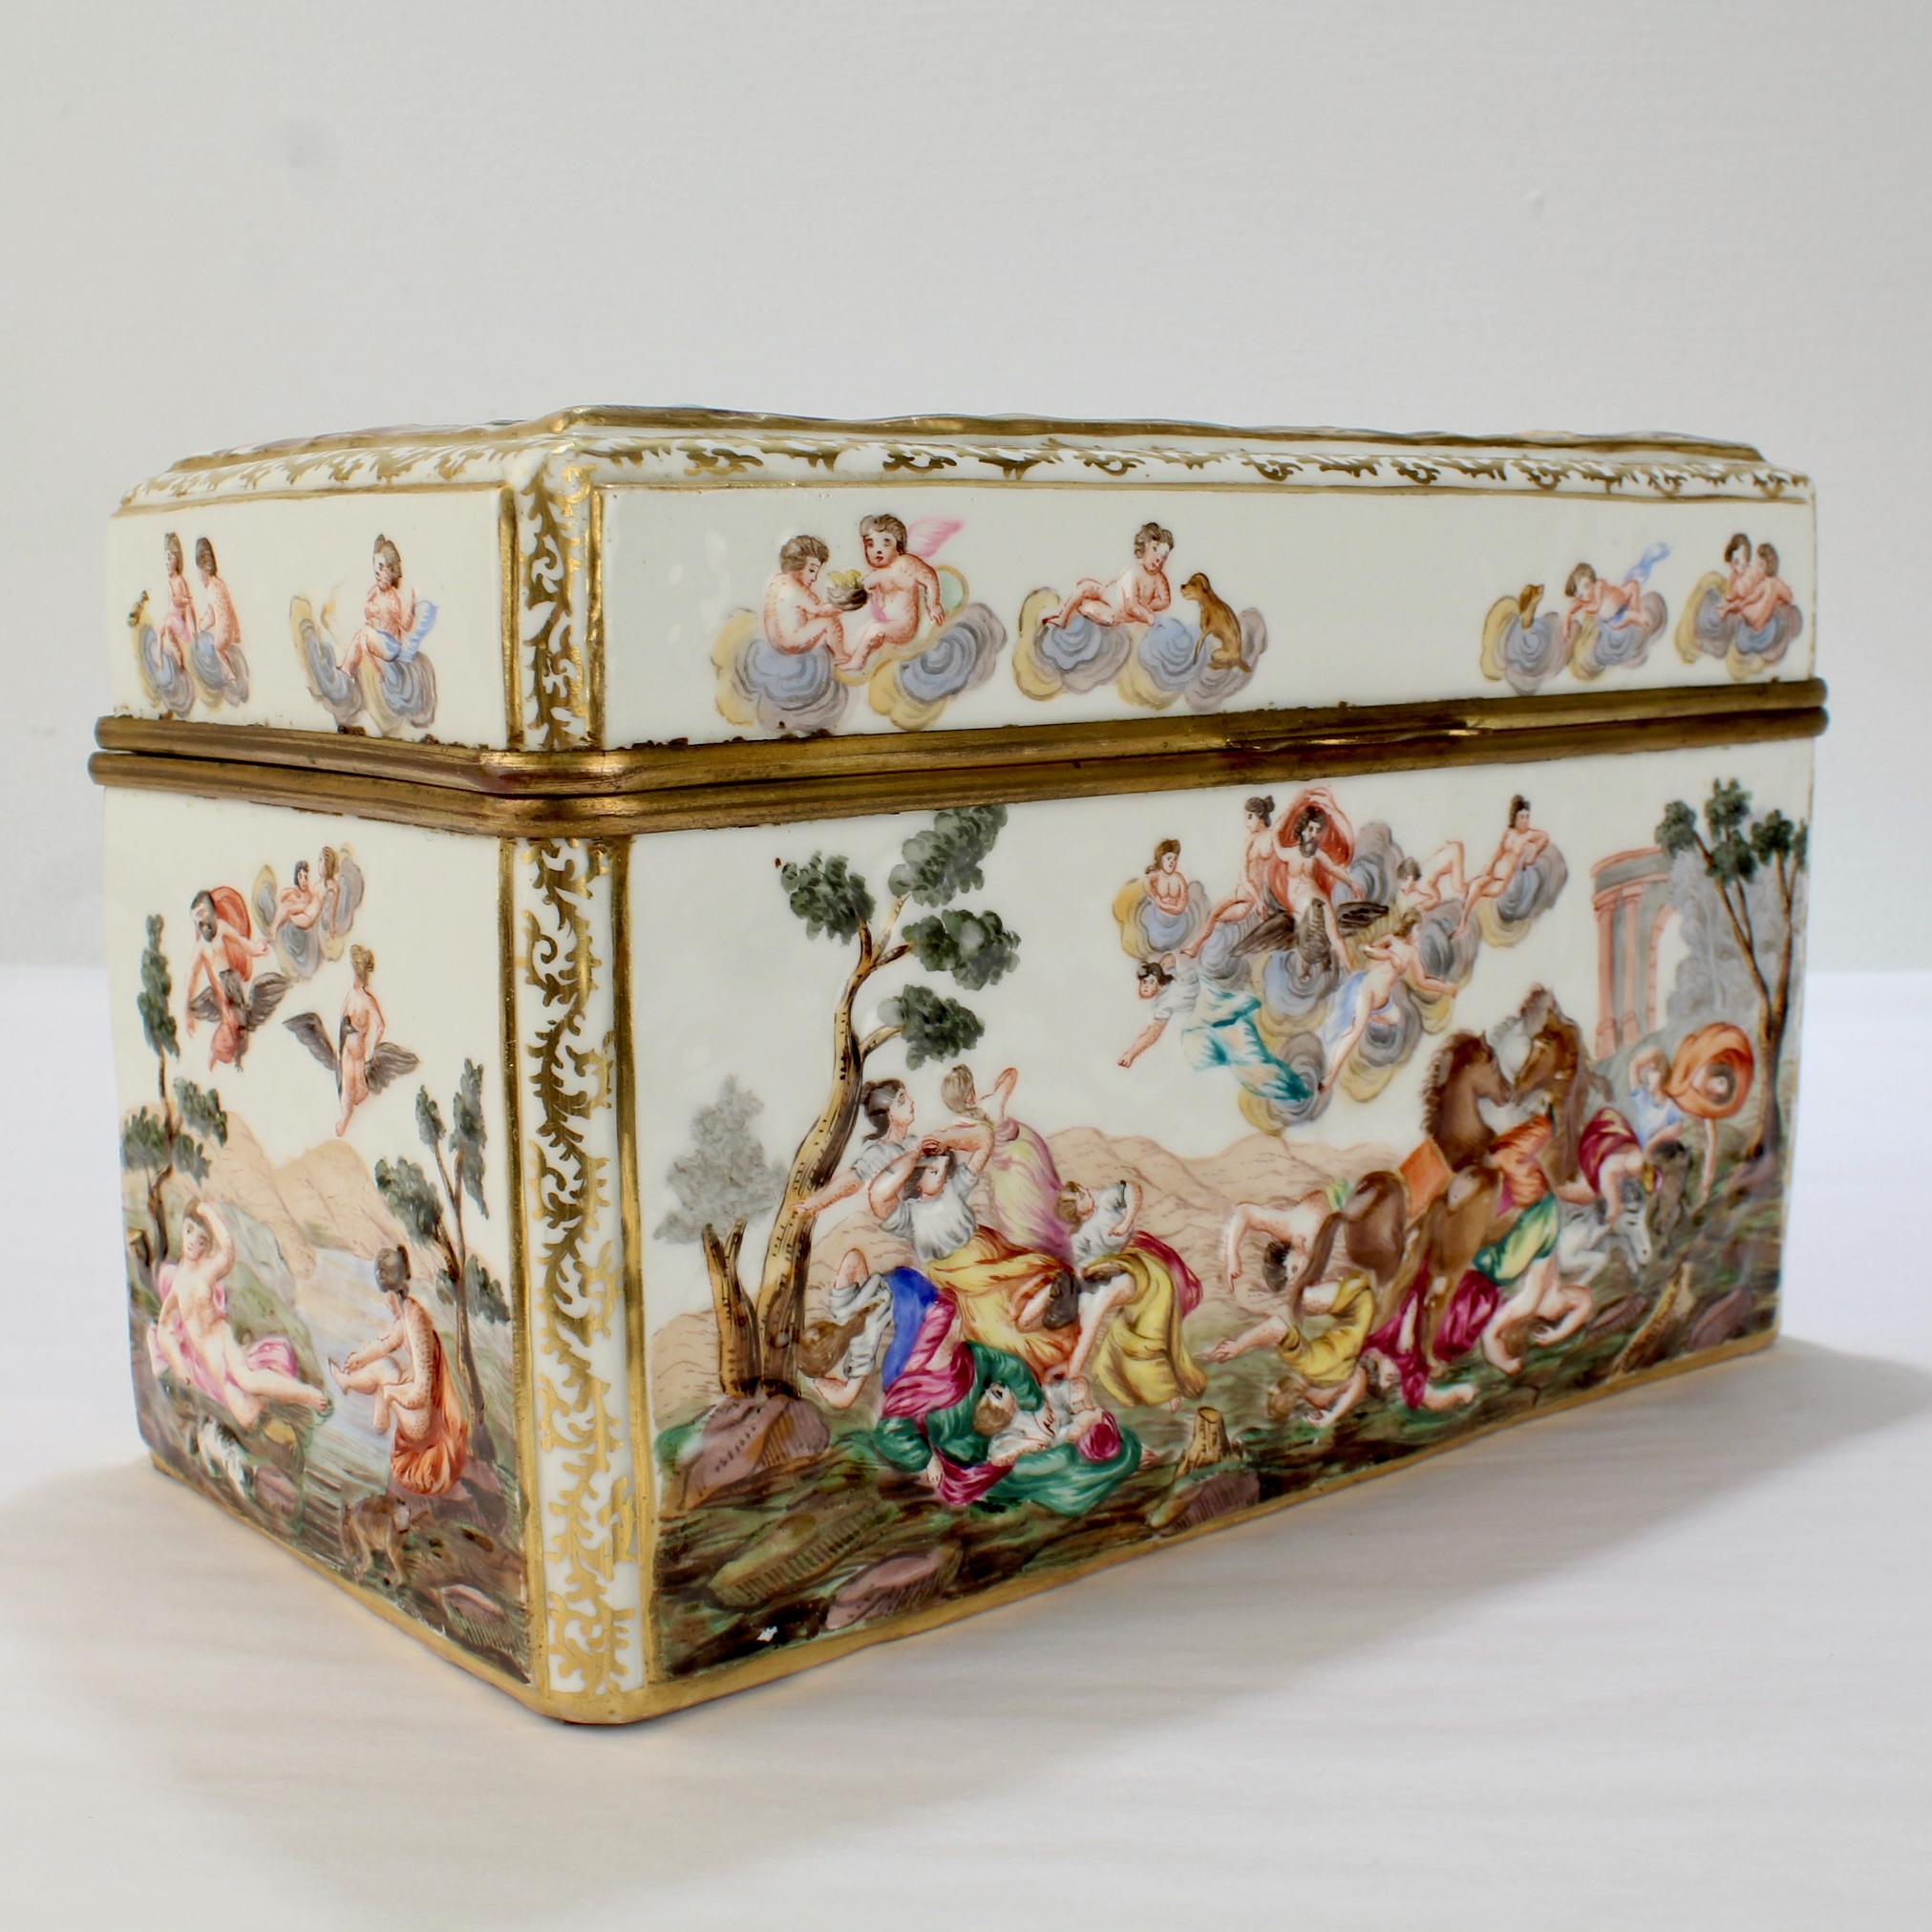 A very fine large, antique Capodimonte porcelain casket or table box. 

In the Meissen style with raised polychrome decoration to all sides.

Having a gilt bronze hinged mount. 

Both the lid and sides were fired in a non-uniform, wavy way.